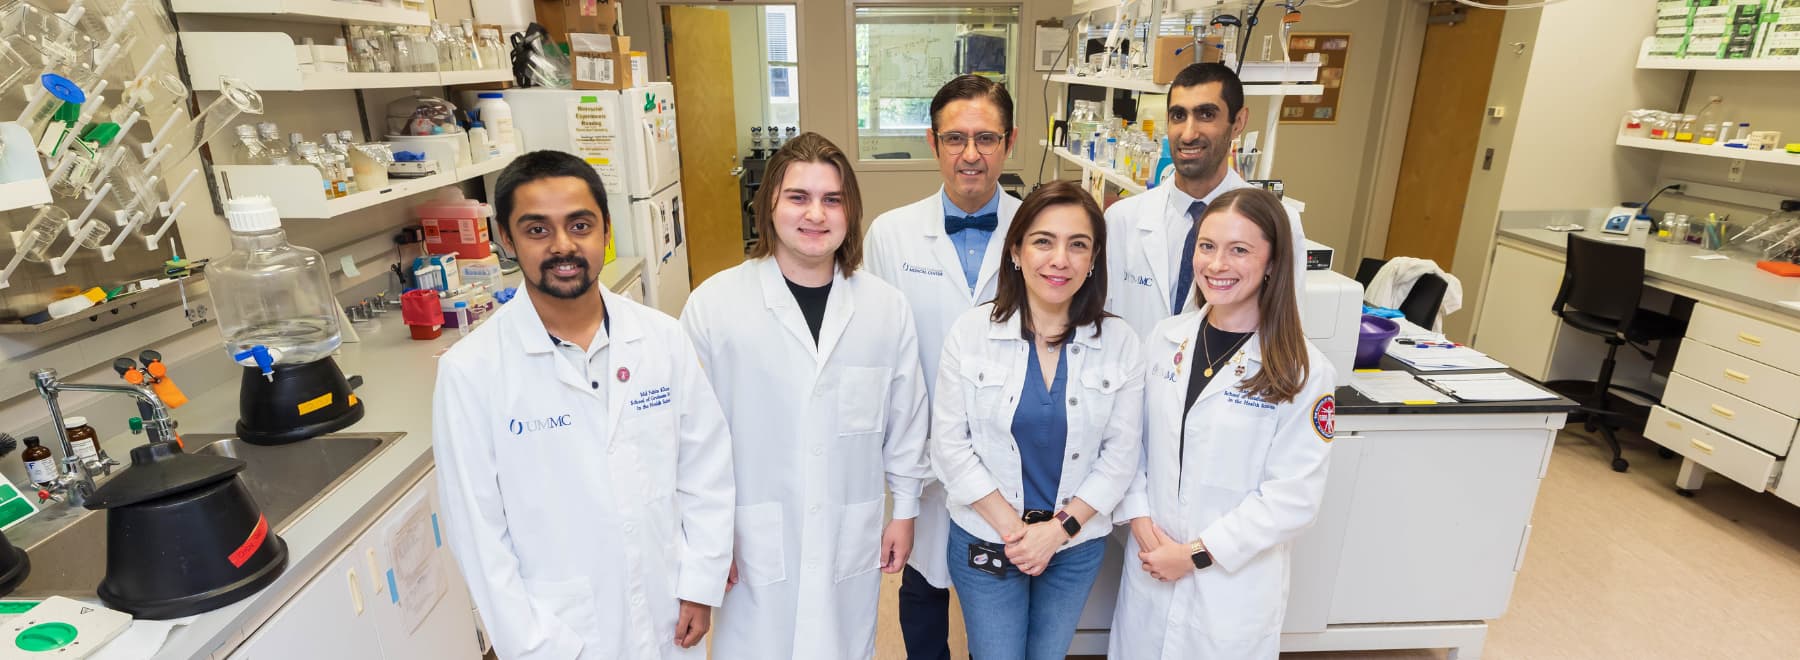 Group photo of Molecular Center of Health and Disease team members in lab.